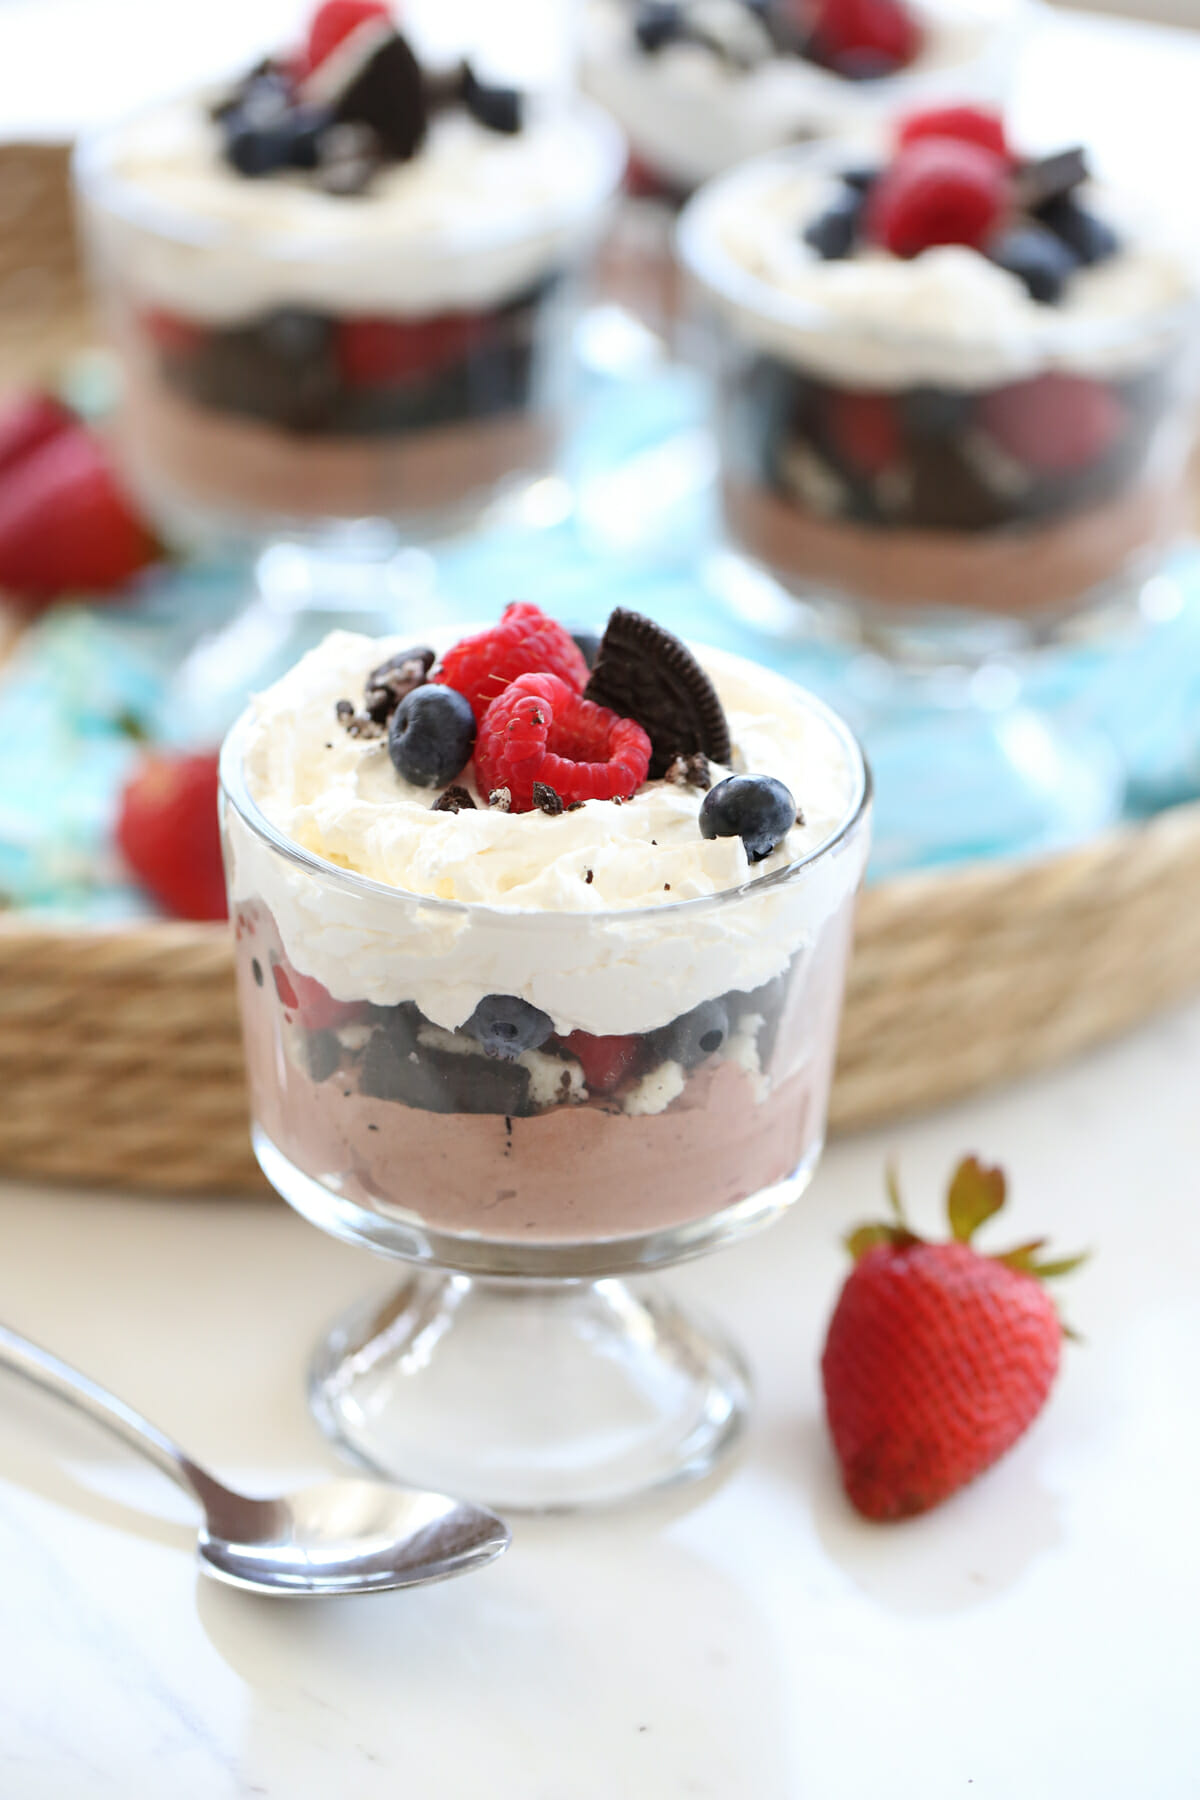 Chocolate berry trifle in a glass bowl